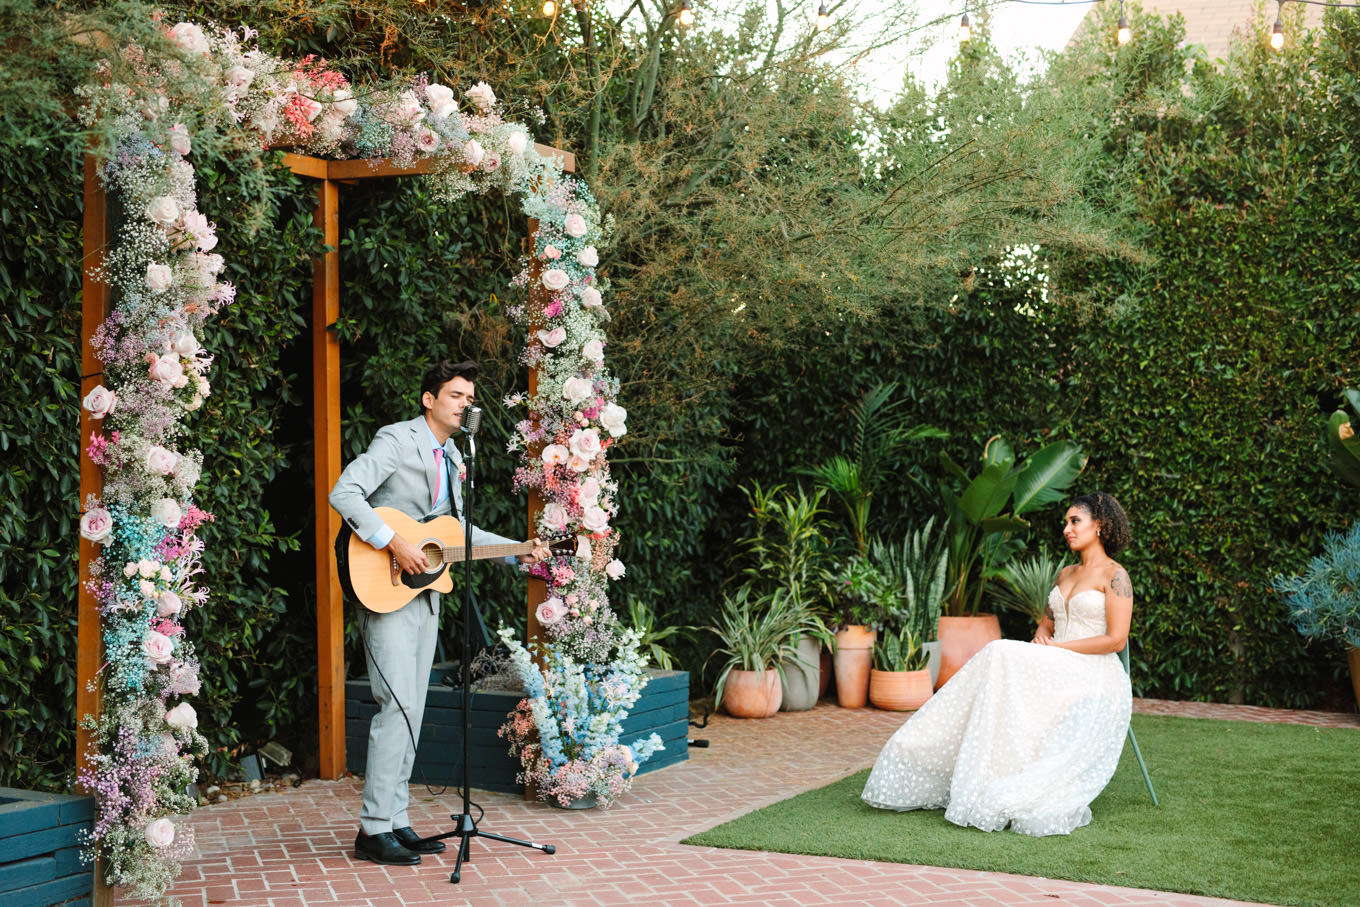 Groom serenading bride at Ruby Street micro wedding Los Angeles Chinatown engagement session | Engagement, elopement, and wedding photography roundup of Mary Costa’s favorite images from 2020 | Colorful and elevated photography for fun-loving couples in Southern California | #2020wedding #elopement #weddingphoto #weddingphotography #microwedding   Source: Mary Costa Photography | Los Angeles